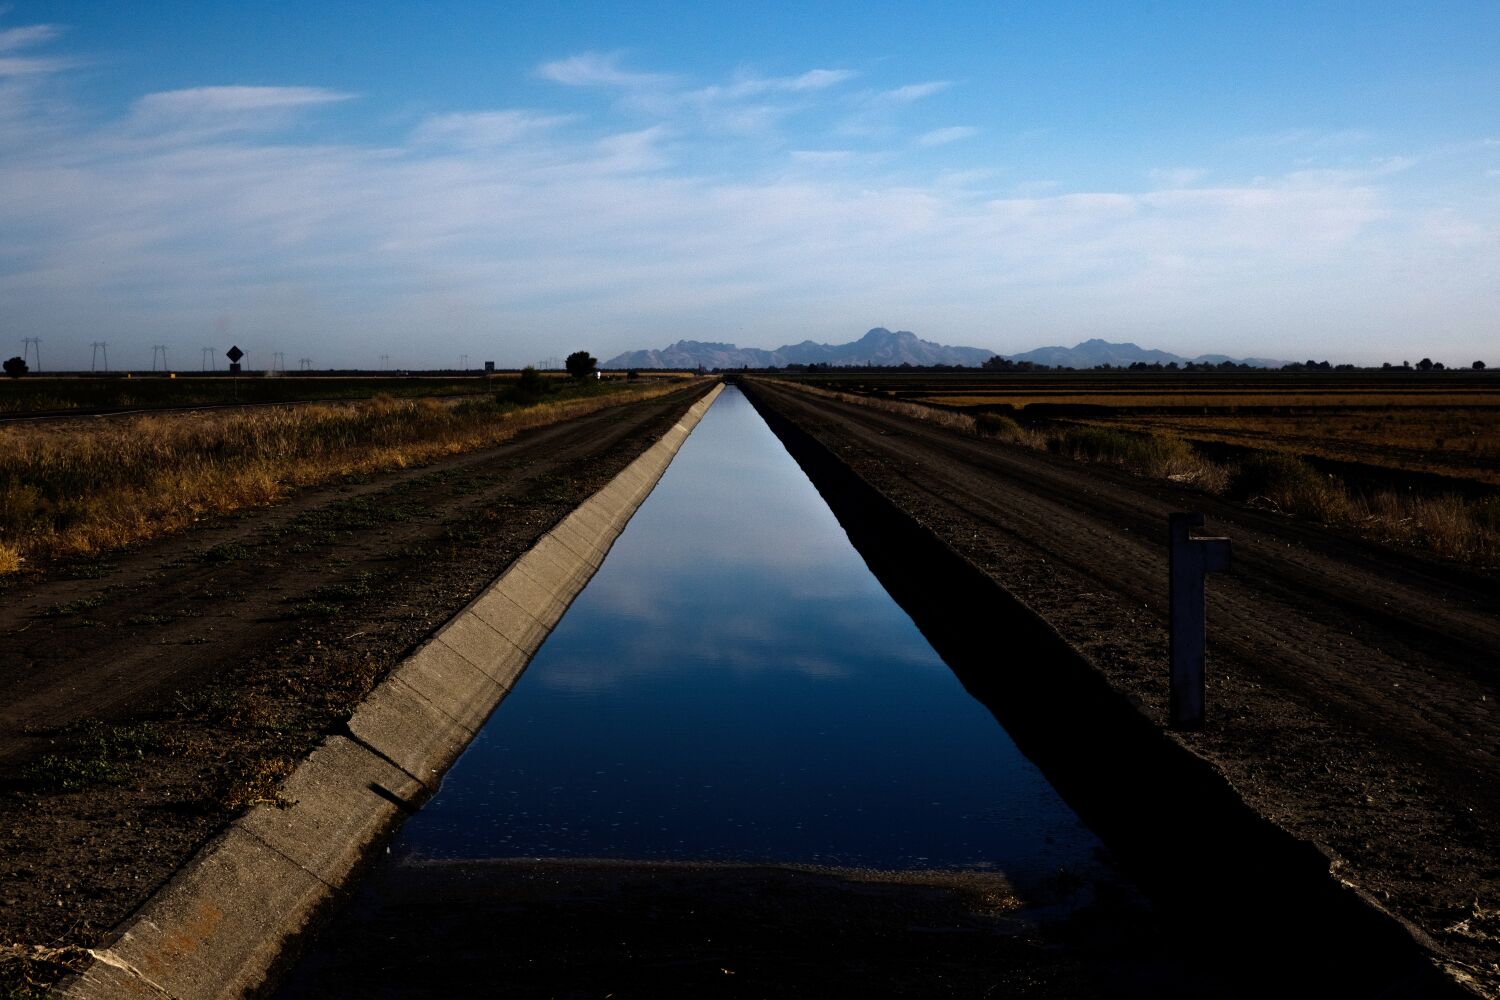 'Improvised, spotty and belated': Will California reform its oversight of water rights?